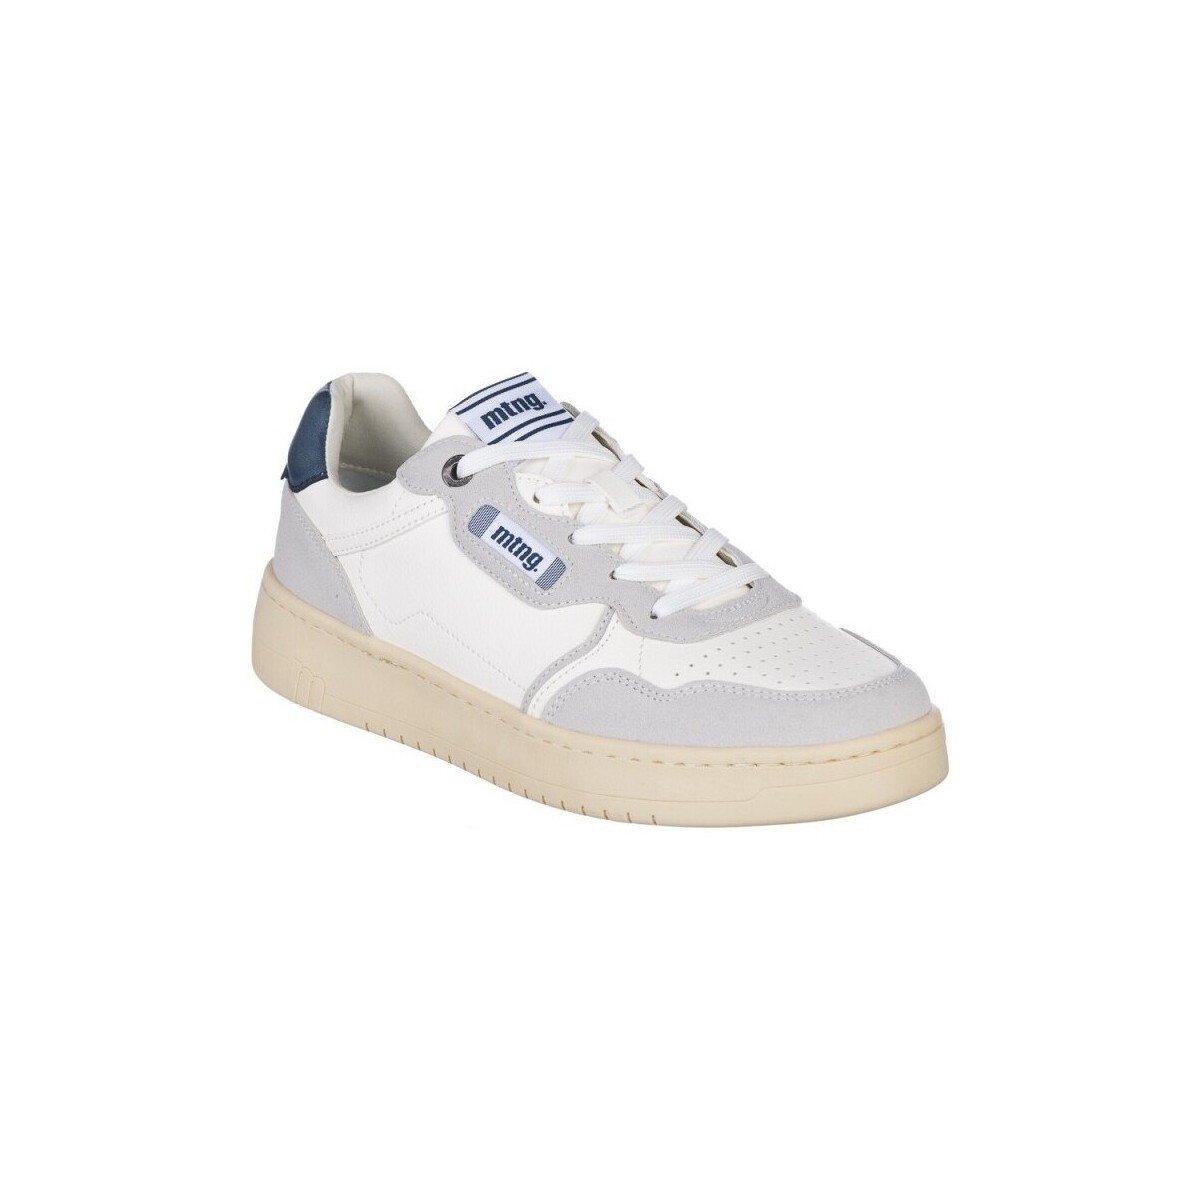 Chaussures Homme Baskets basses MTNG SNEAKERS  84504 Blanc